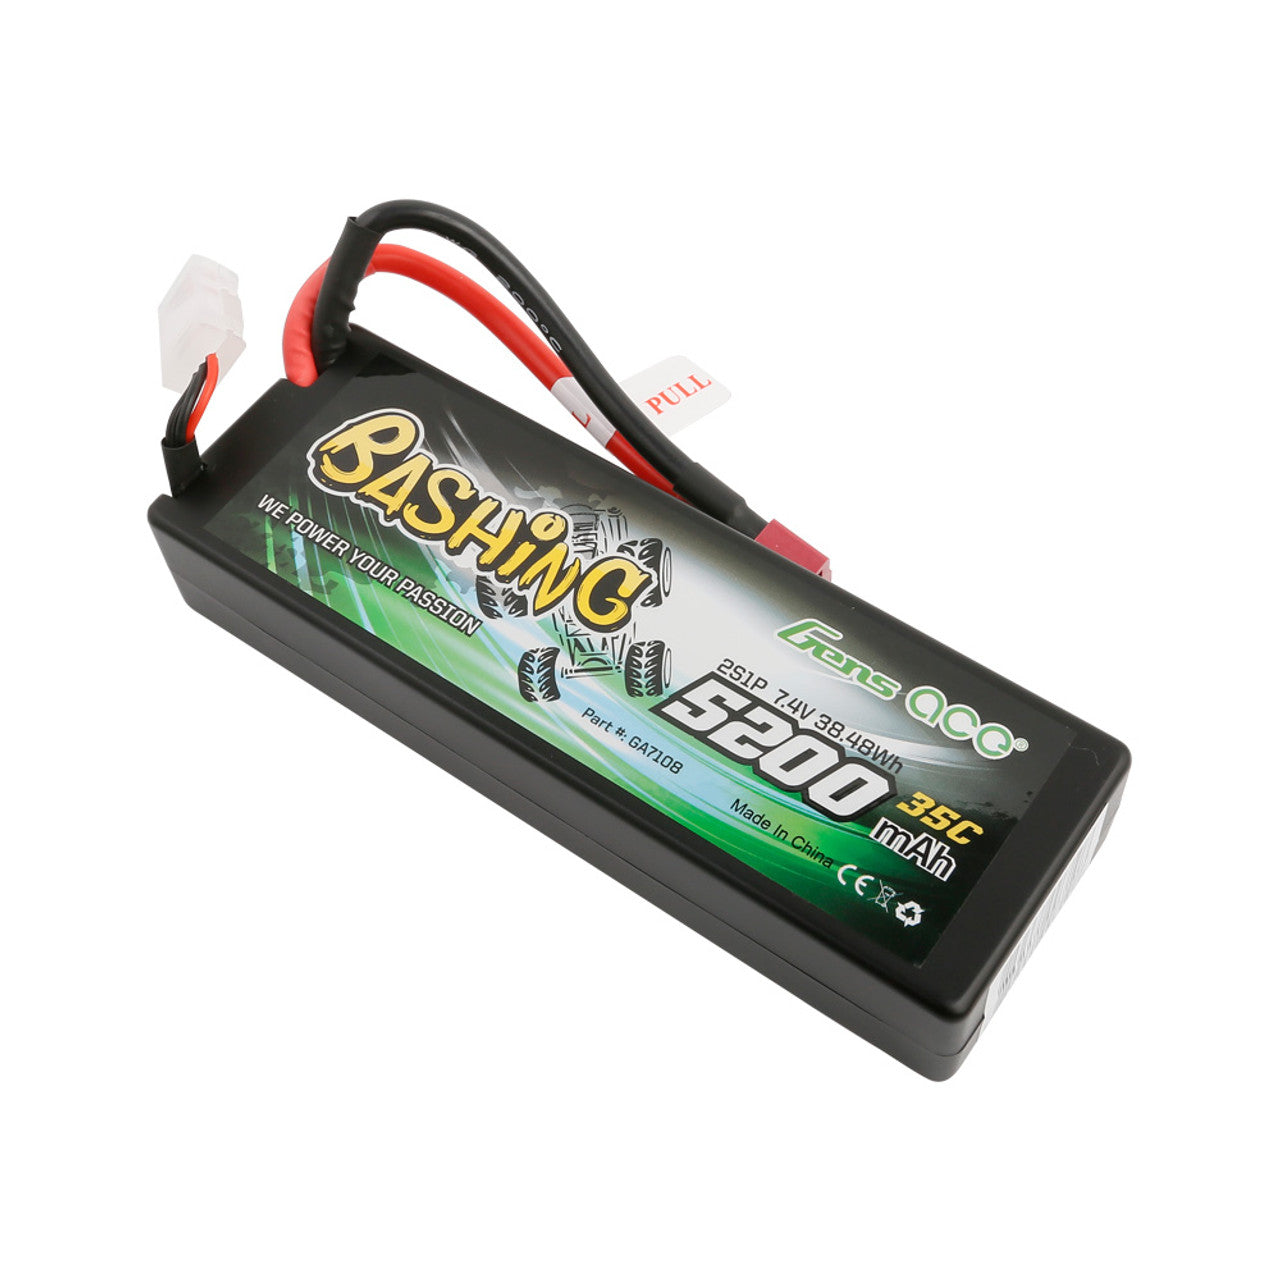 Gens Ace Bashing Series 5200mAh 7.4V 2S1P 35C Car Lipo Battery Pack Hardcase 24# With Deans Plug - Techtonic Hobbies - Gens Ace